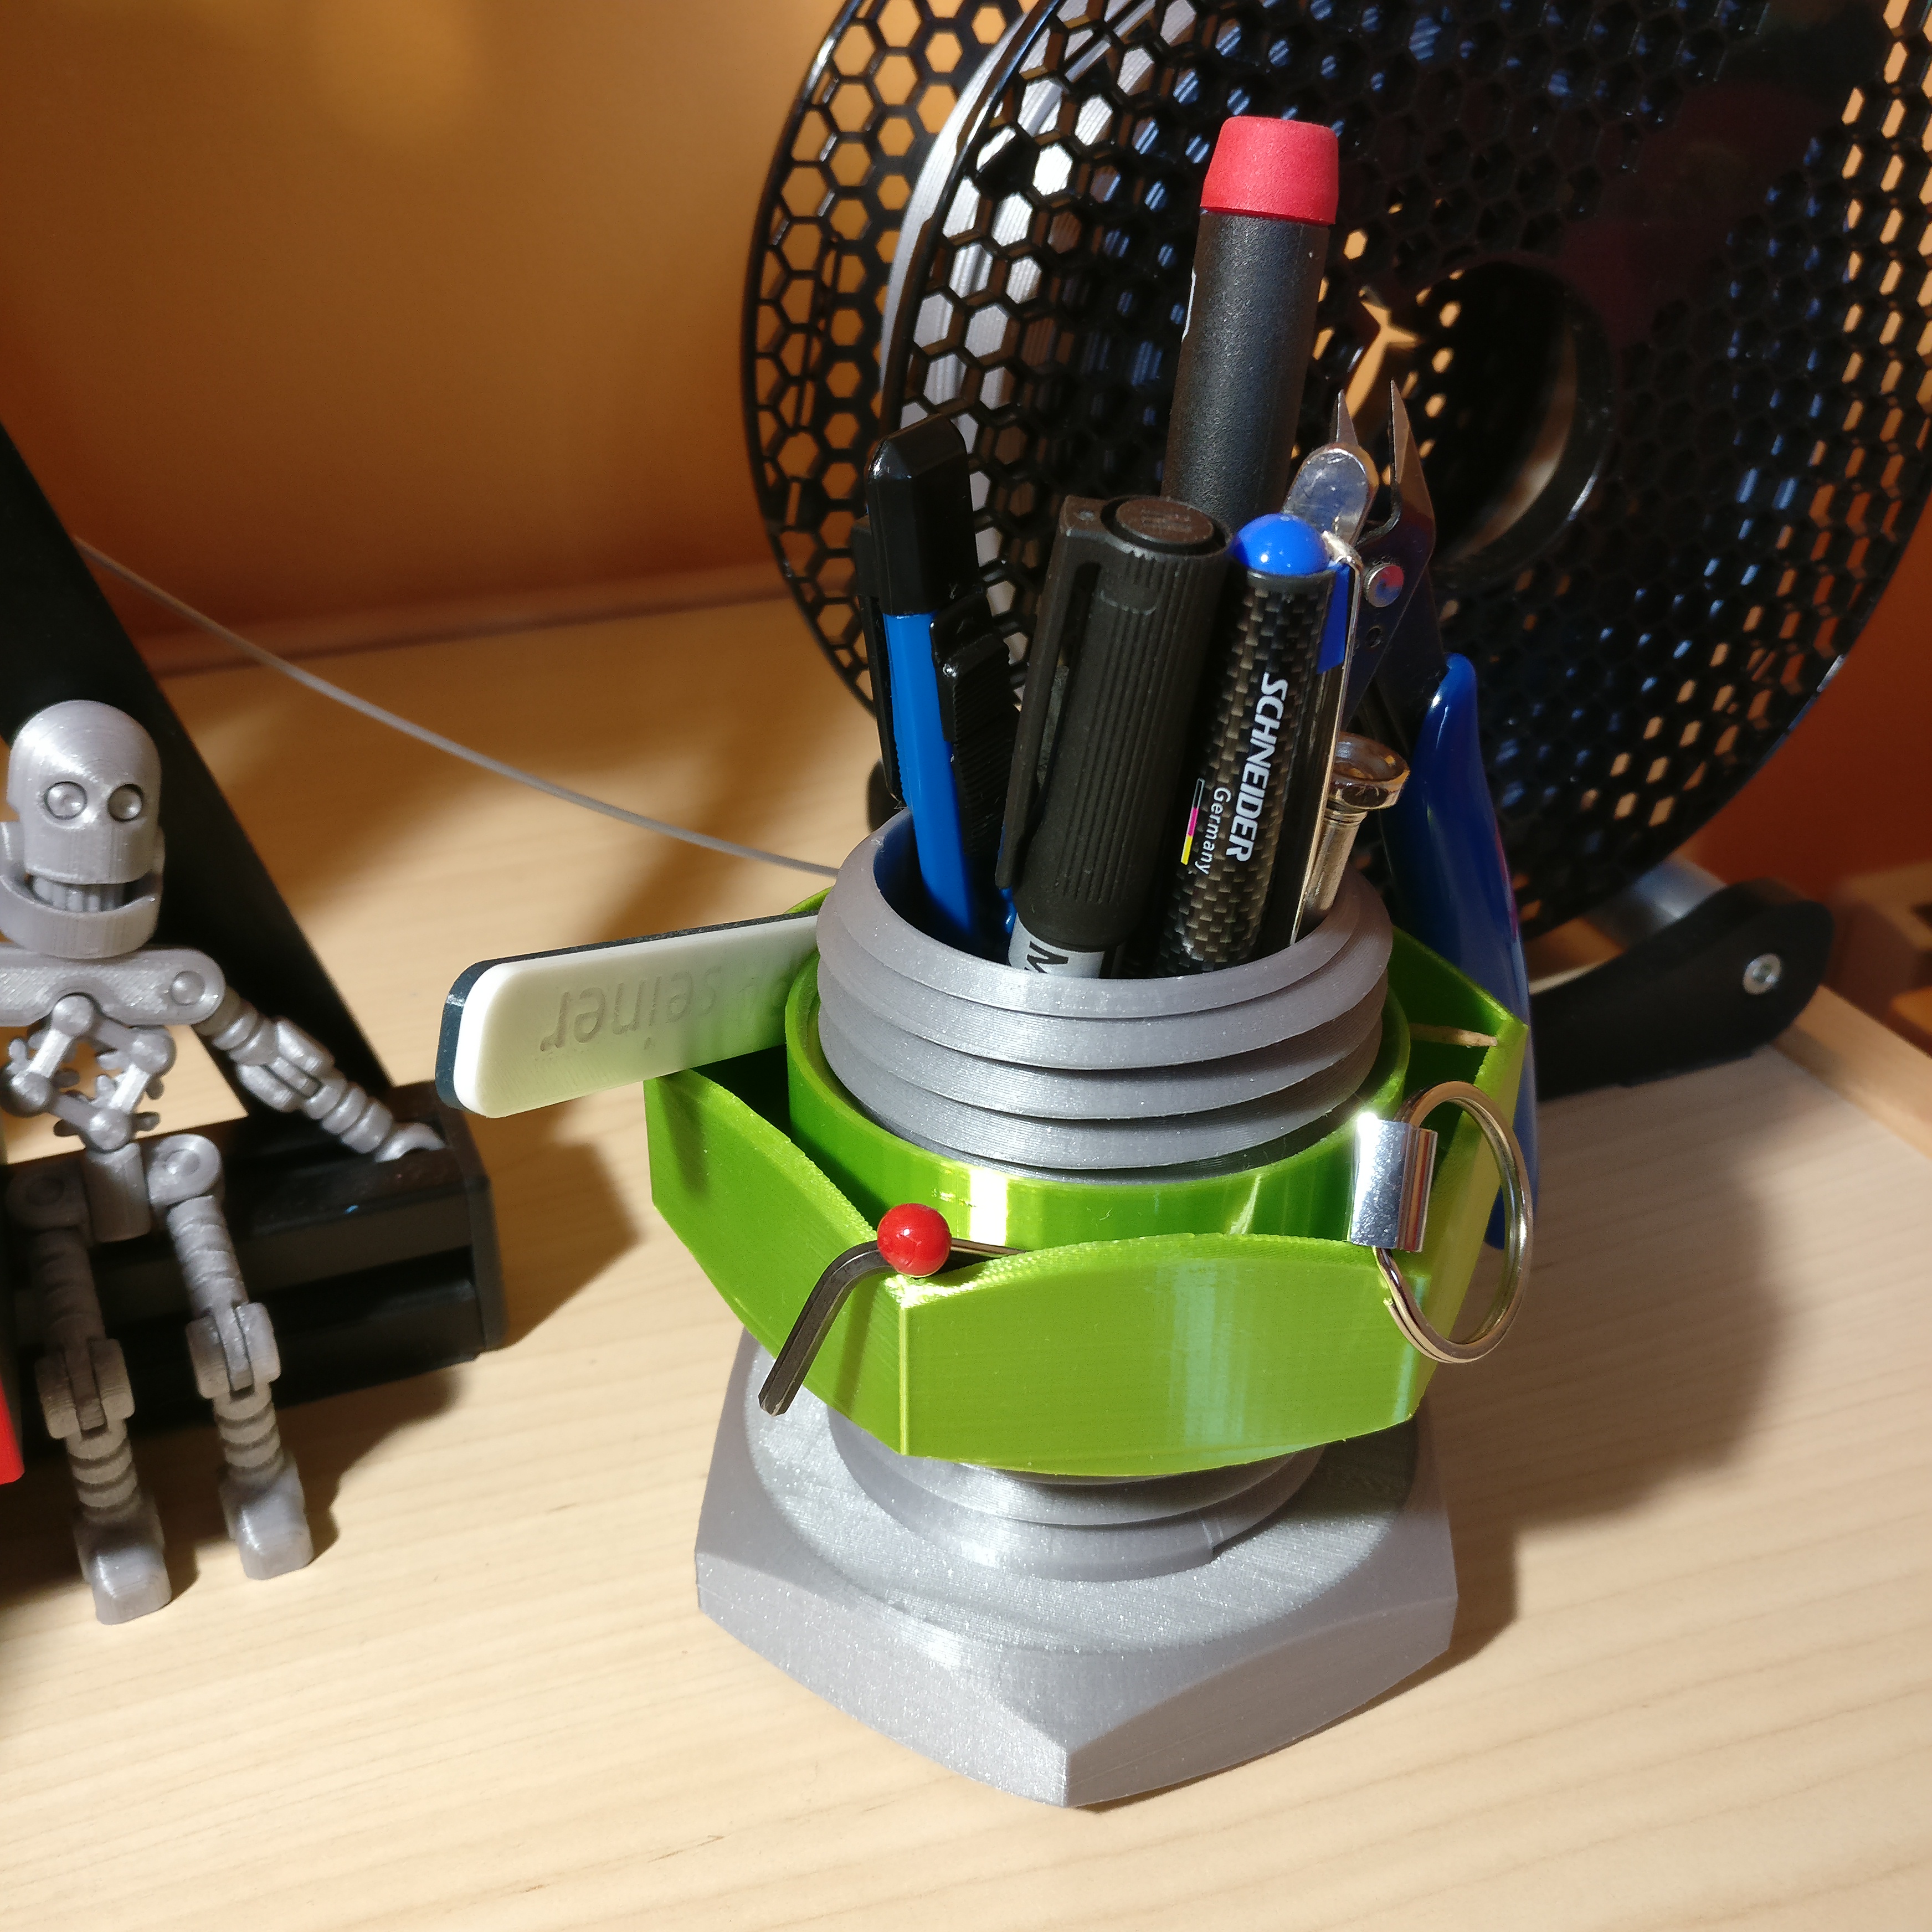 Pen and tool holder for makers